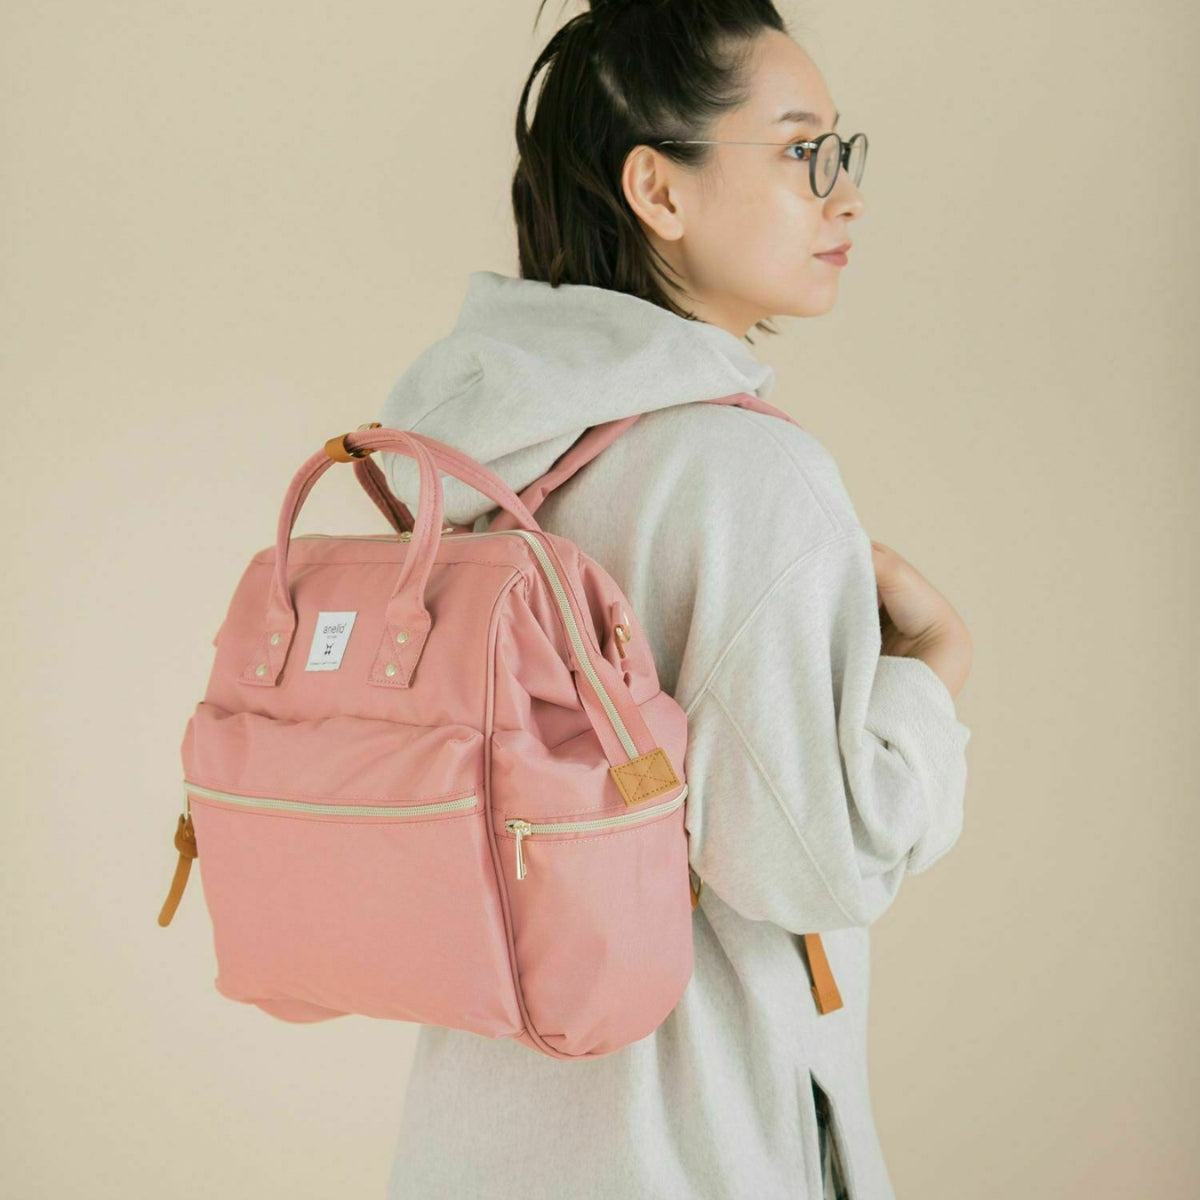 Anello Cross Bottle 3 Way Backpack in Pink